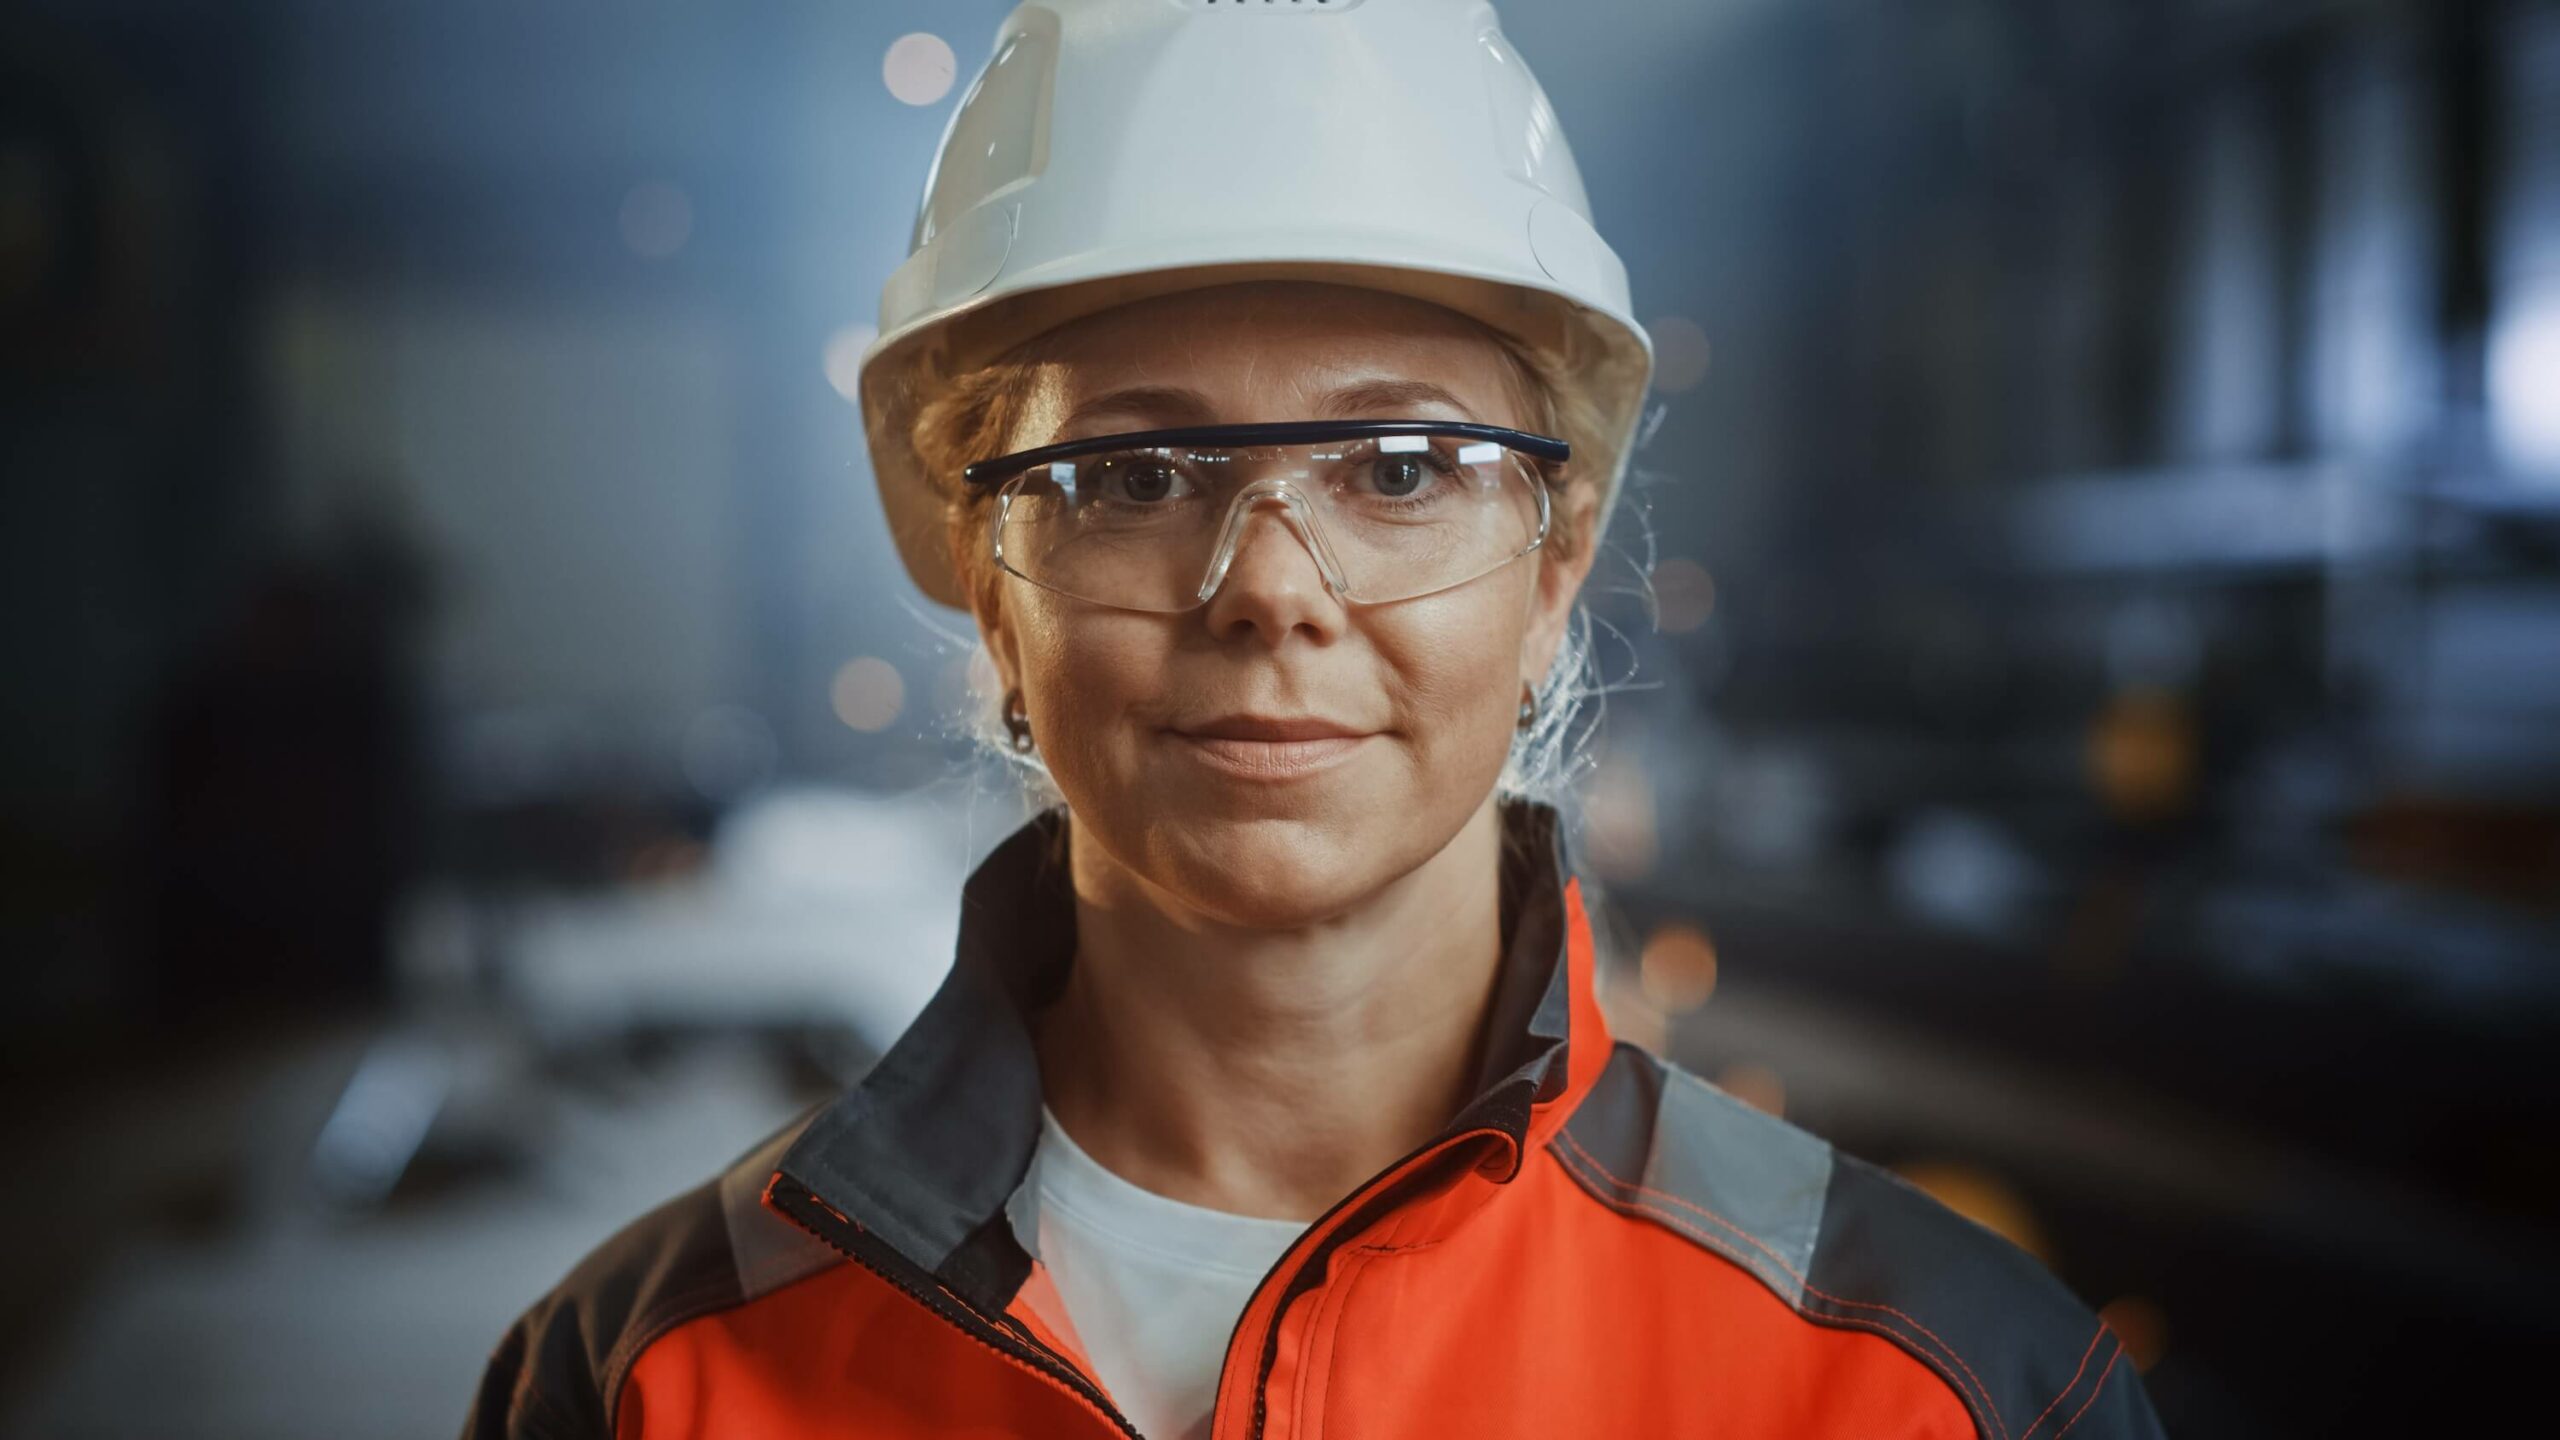 Women in hard hat with right to work check online